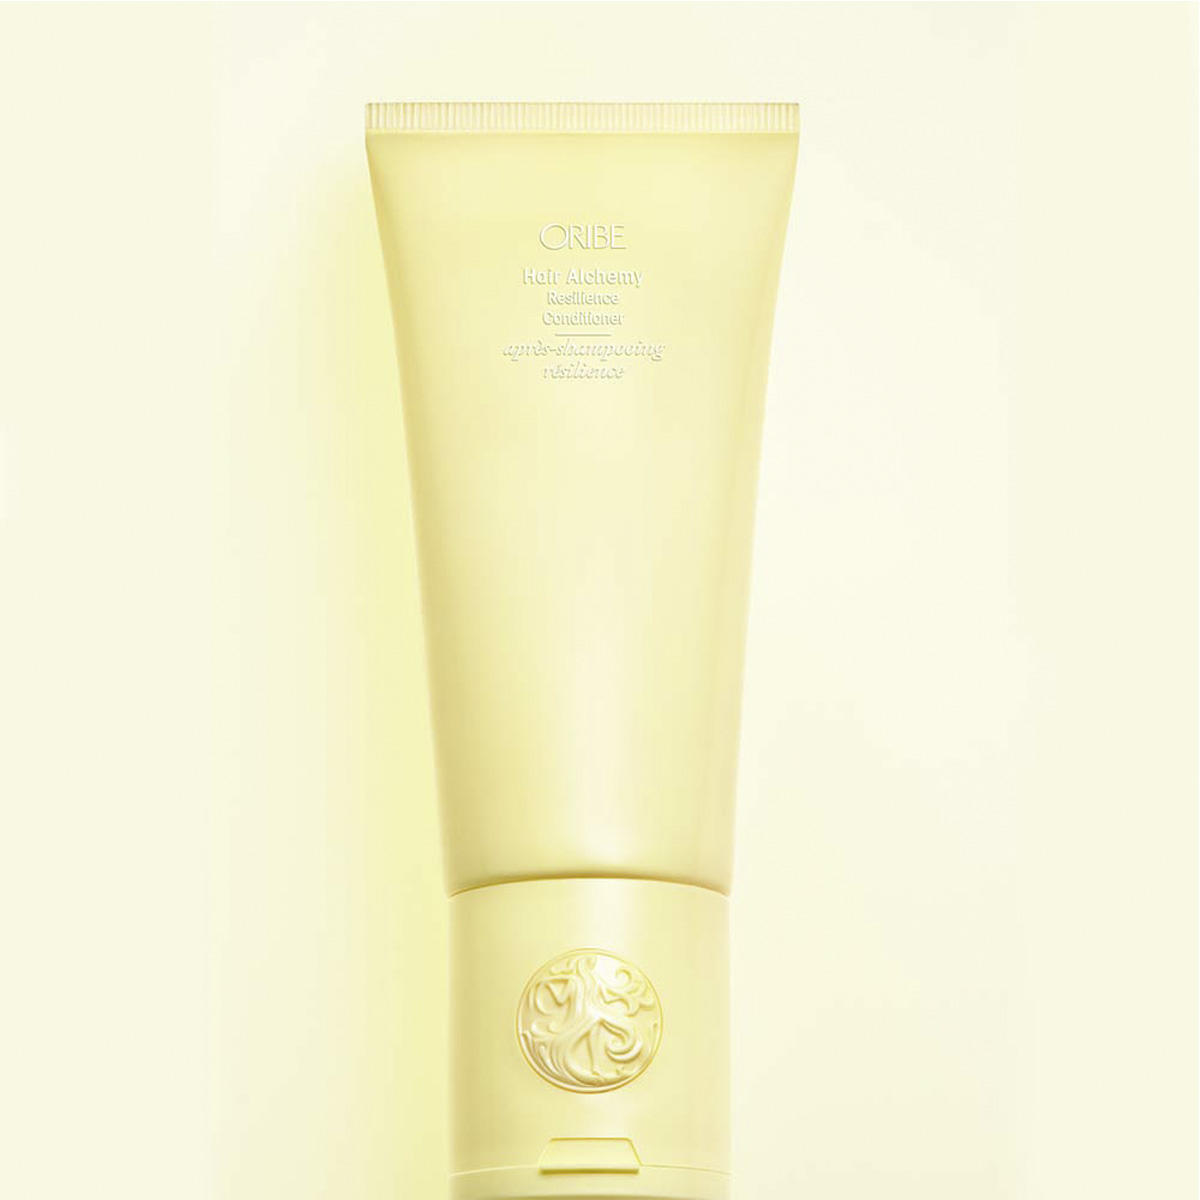 Oribe Hair Alchemy Resilience Conditioner 200 ml - 2